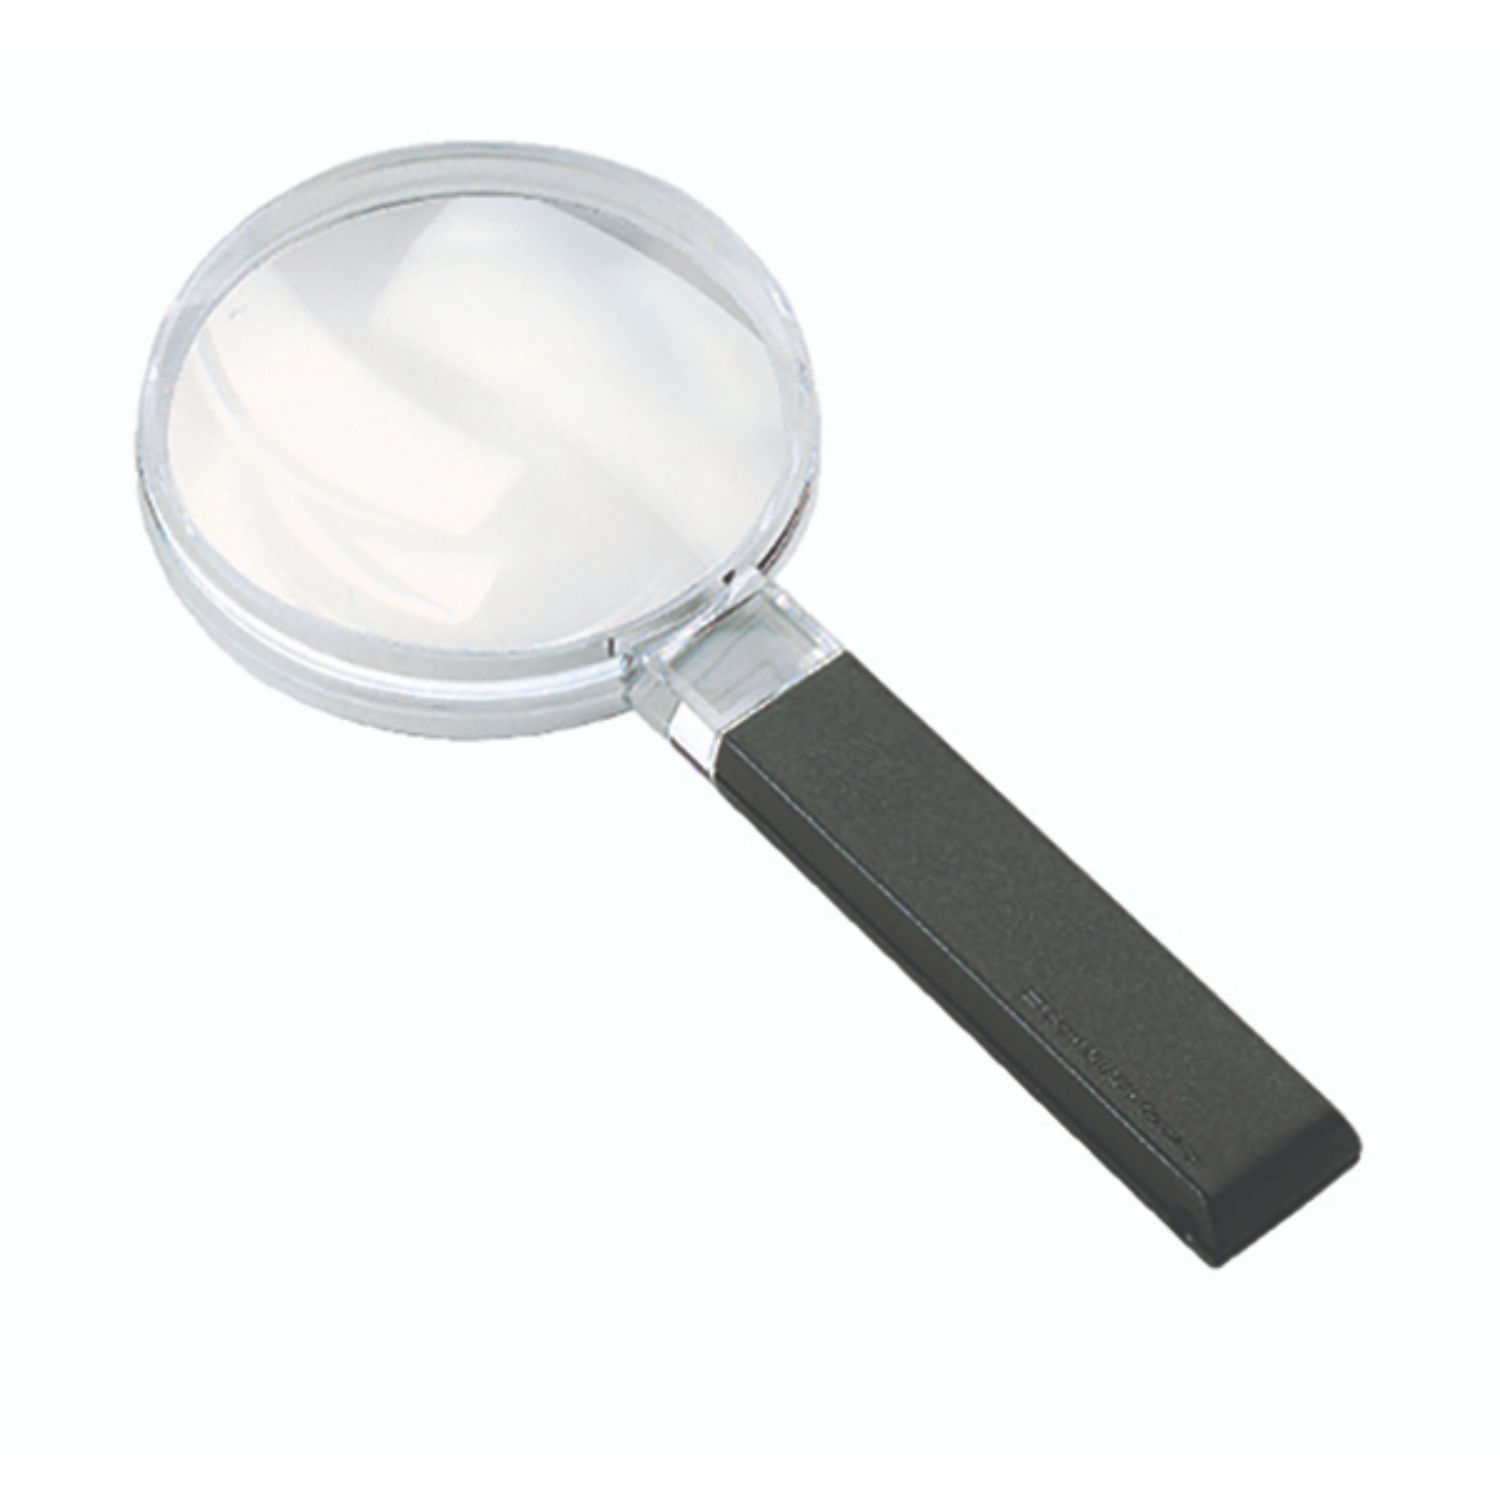 Image of large field round hand-held magnifier from Eschenbach Optik